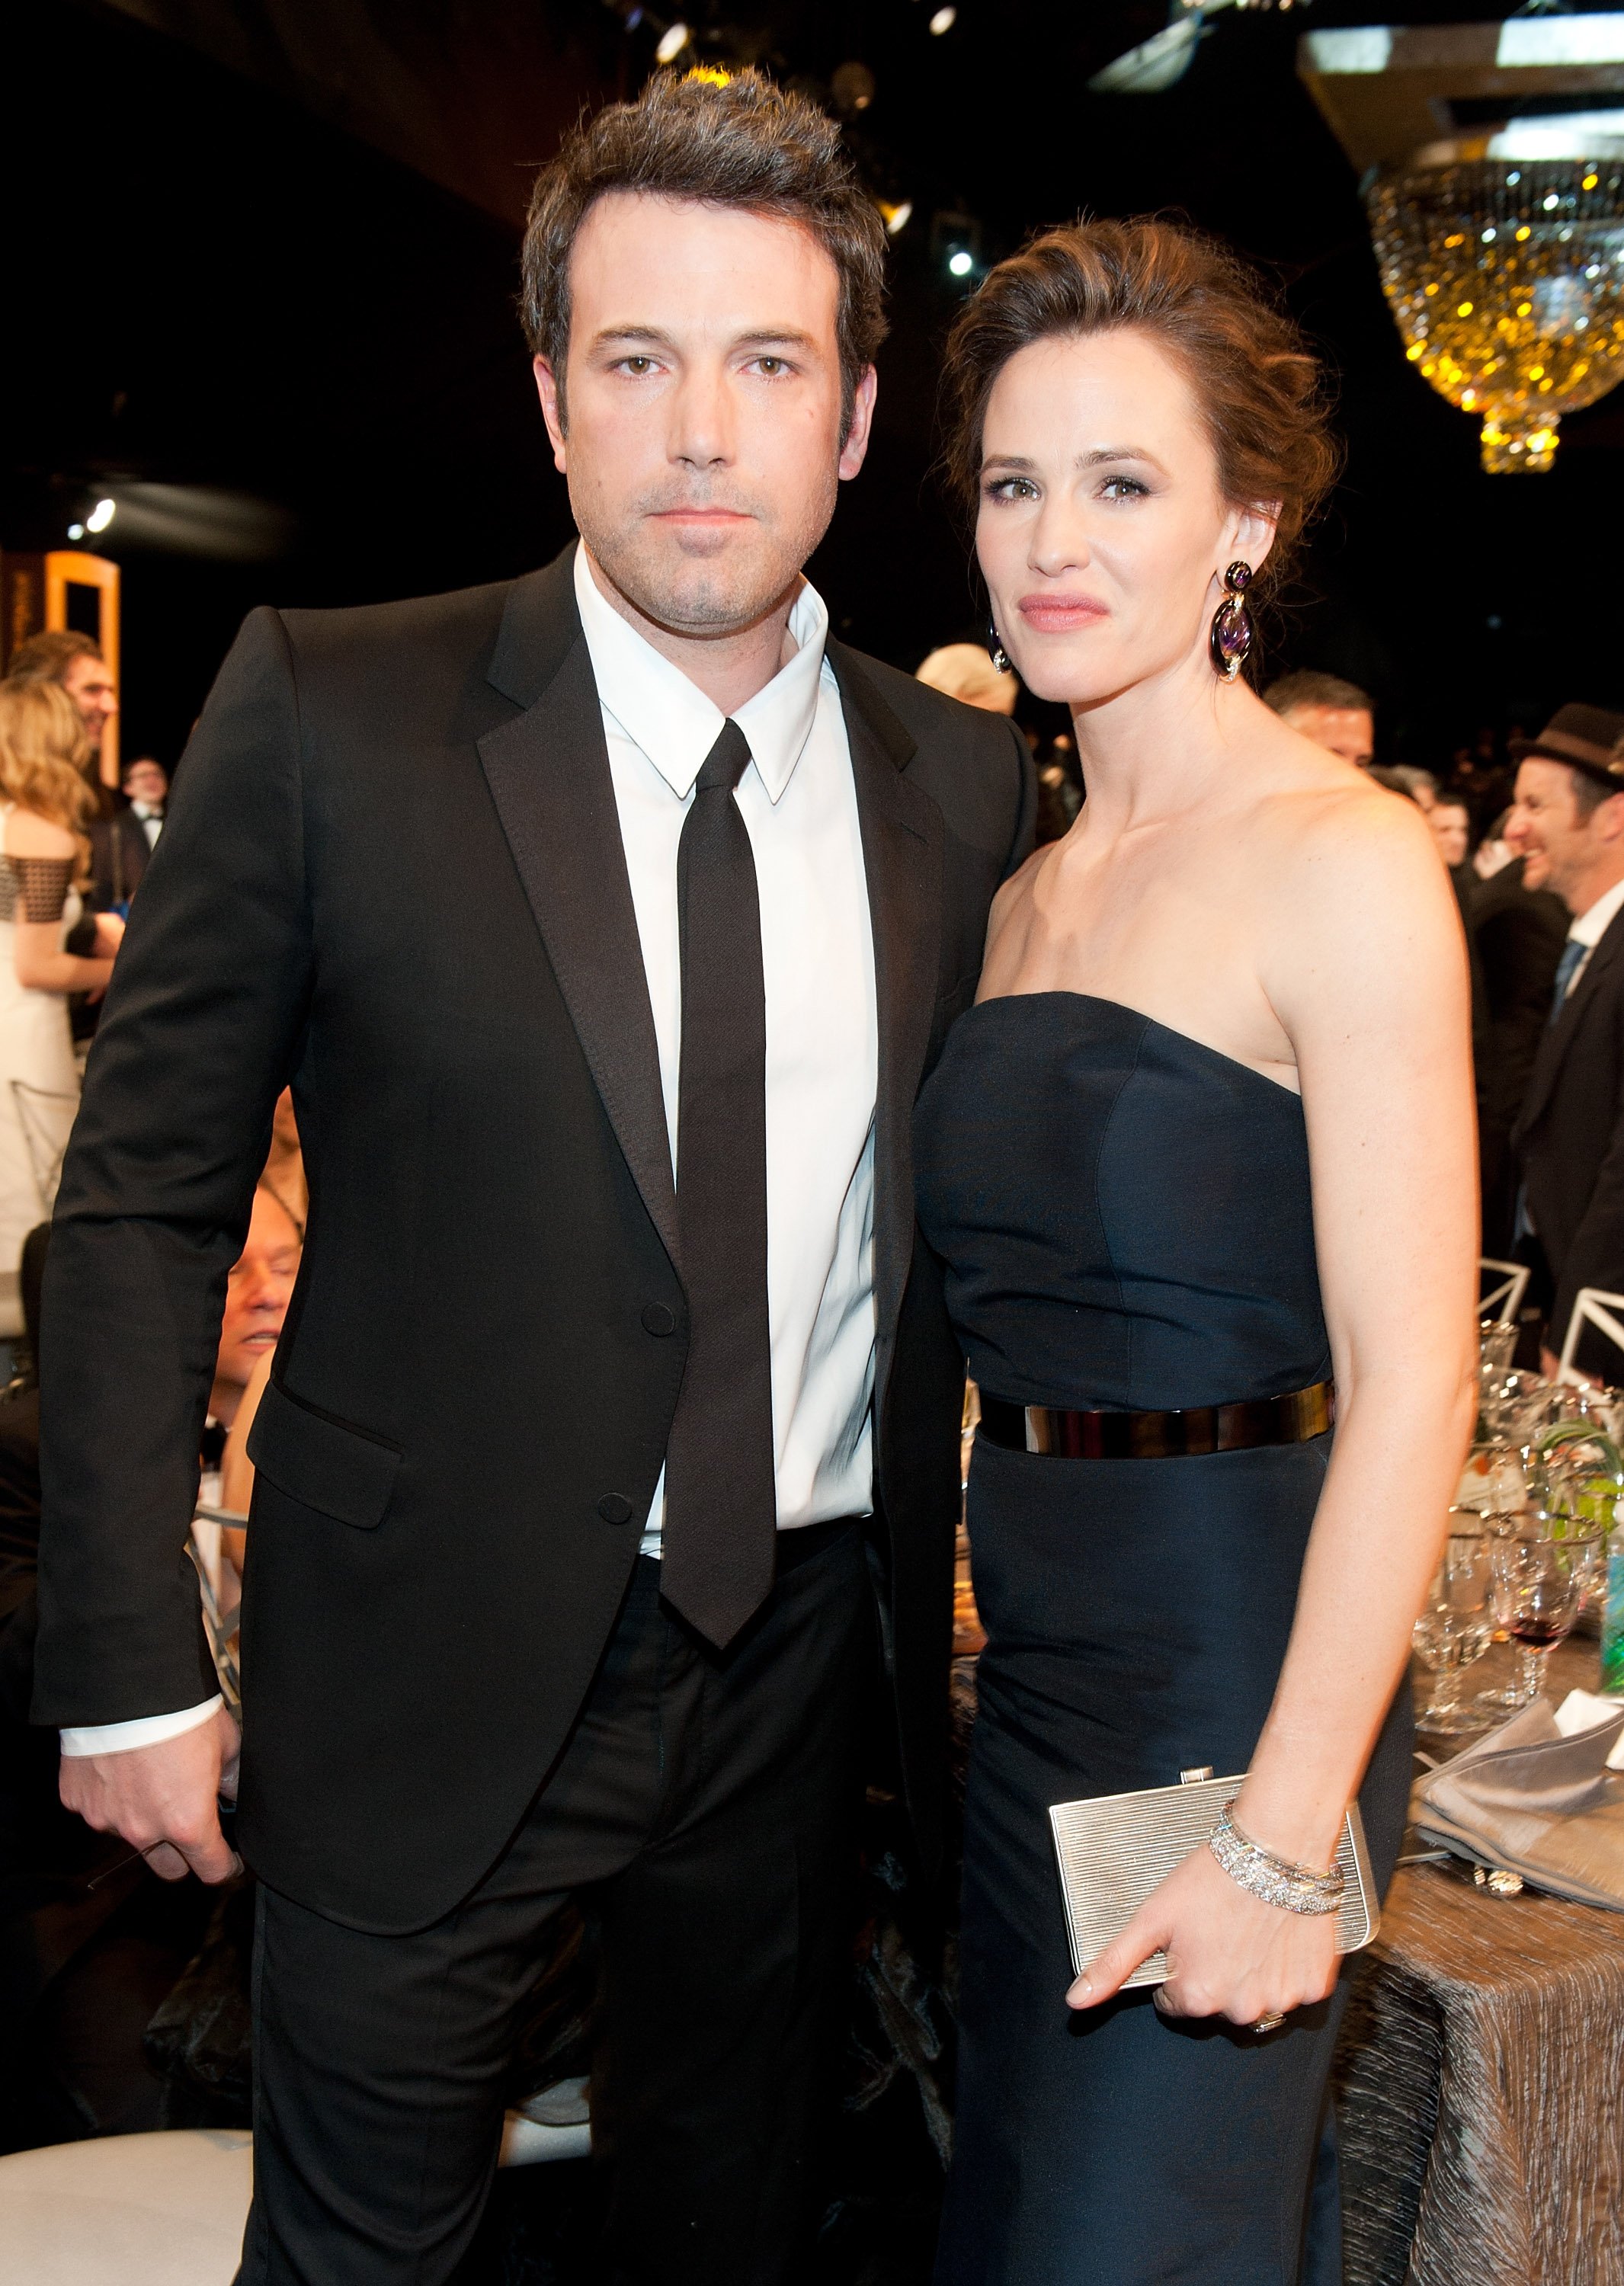 Ben Affleck and Jennifer Garner attend the 20th Annual Screen Actors Guild Awards at The Shrine Auditorium on January 18, 2014 in Los Angeles, California | Source: Getty Images 